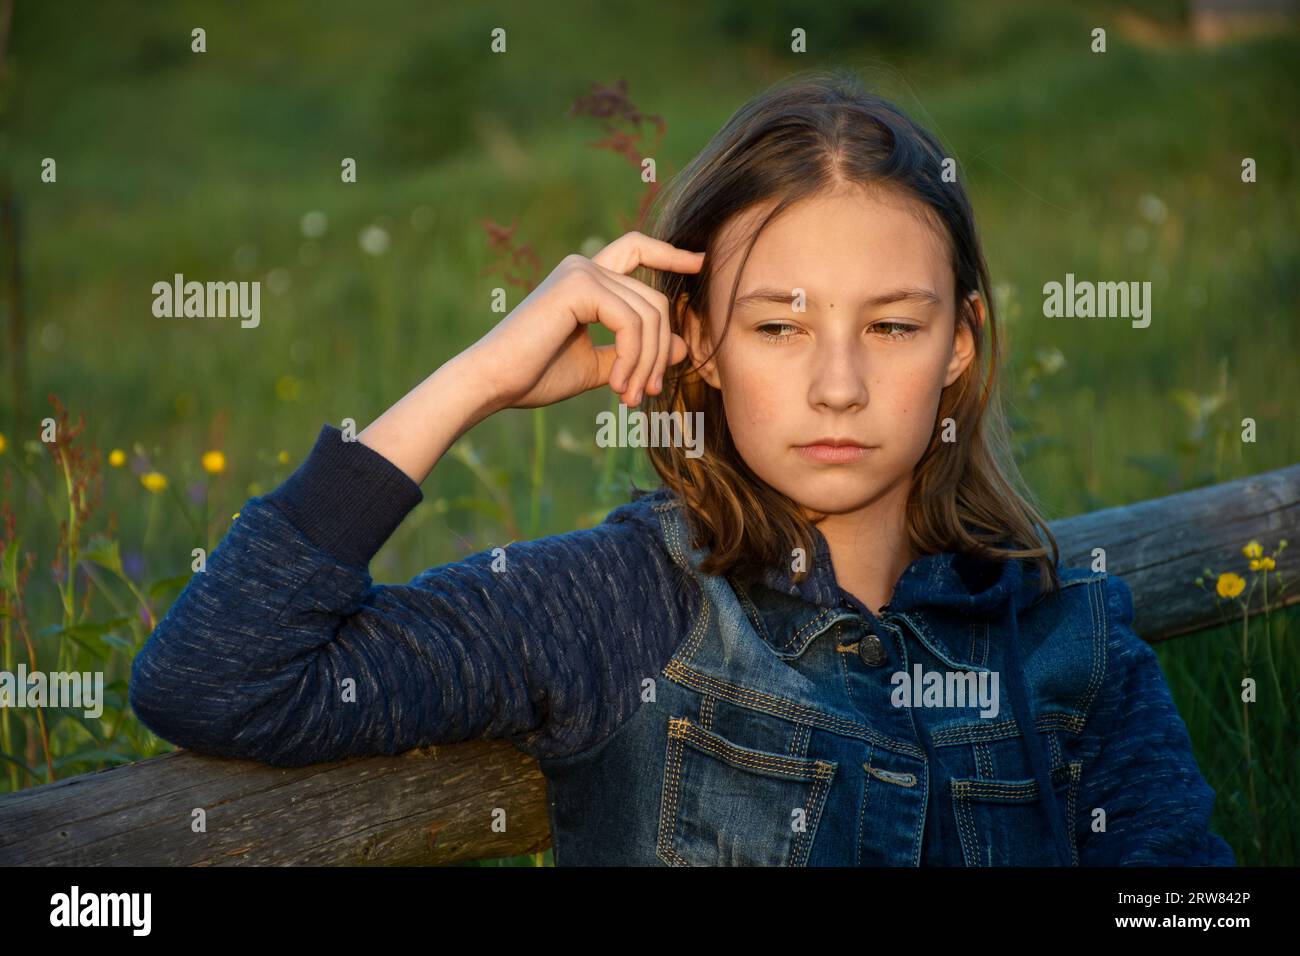 close-up portrait of a thinking teenage girl Stock Photo